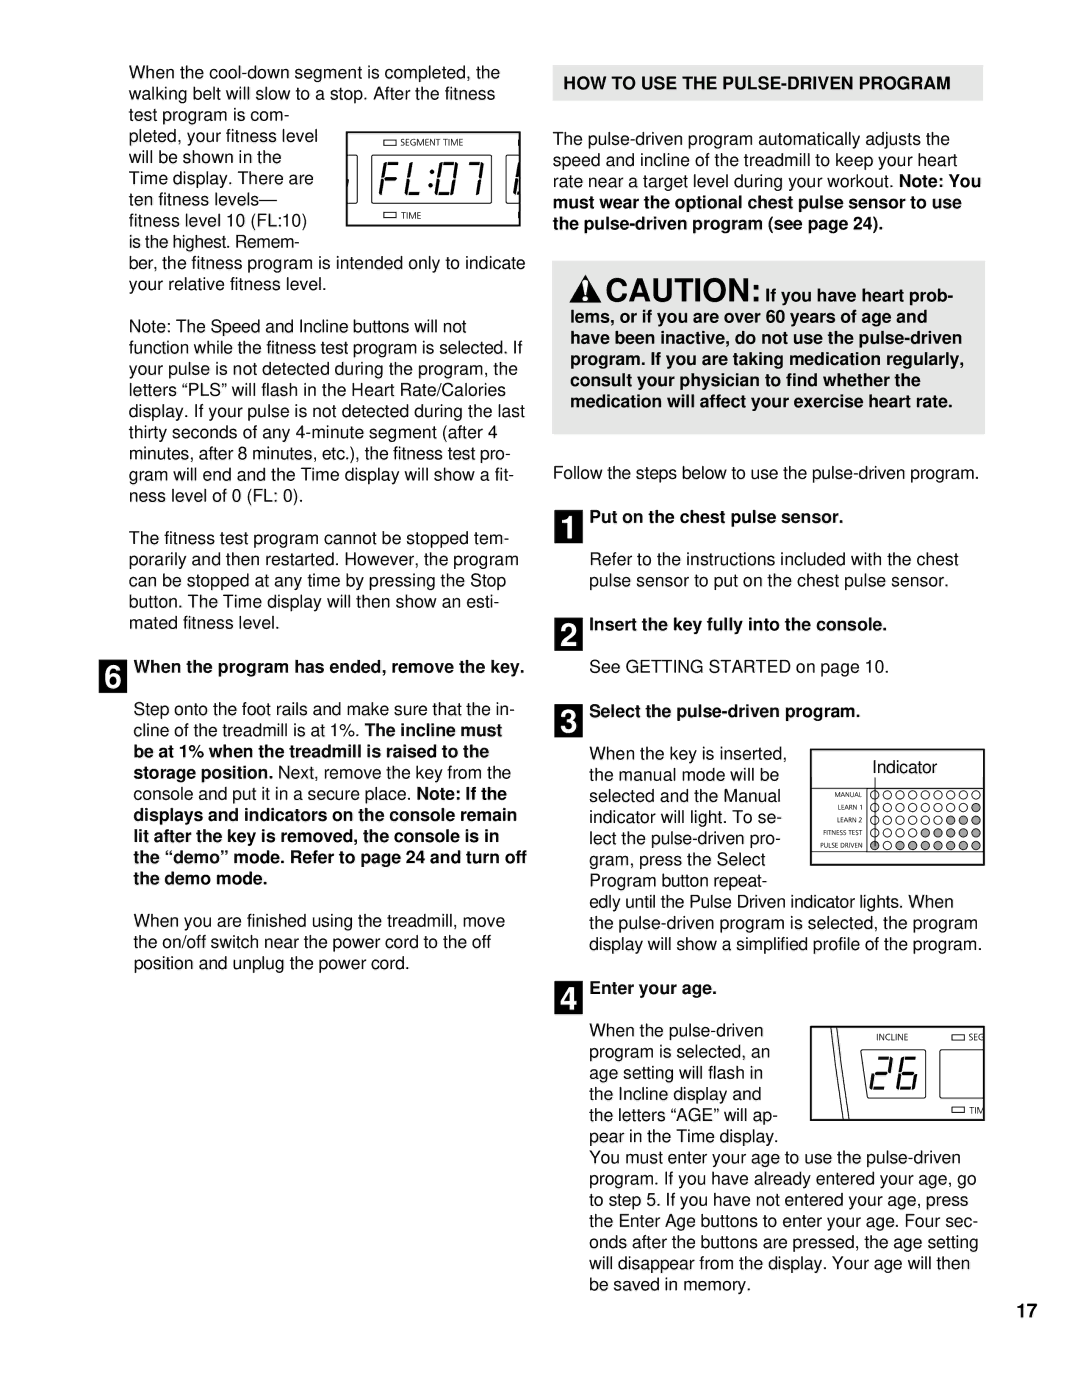 NordicTrack NTTL11994 user manual HOW to USE the PULSE-DRIVEN Program, Select the pulse-driven program 